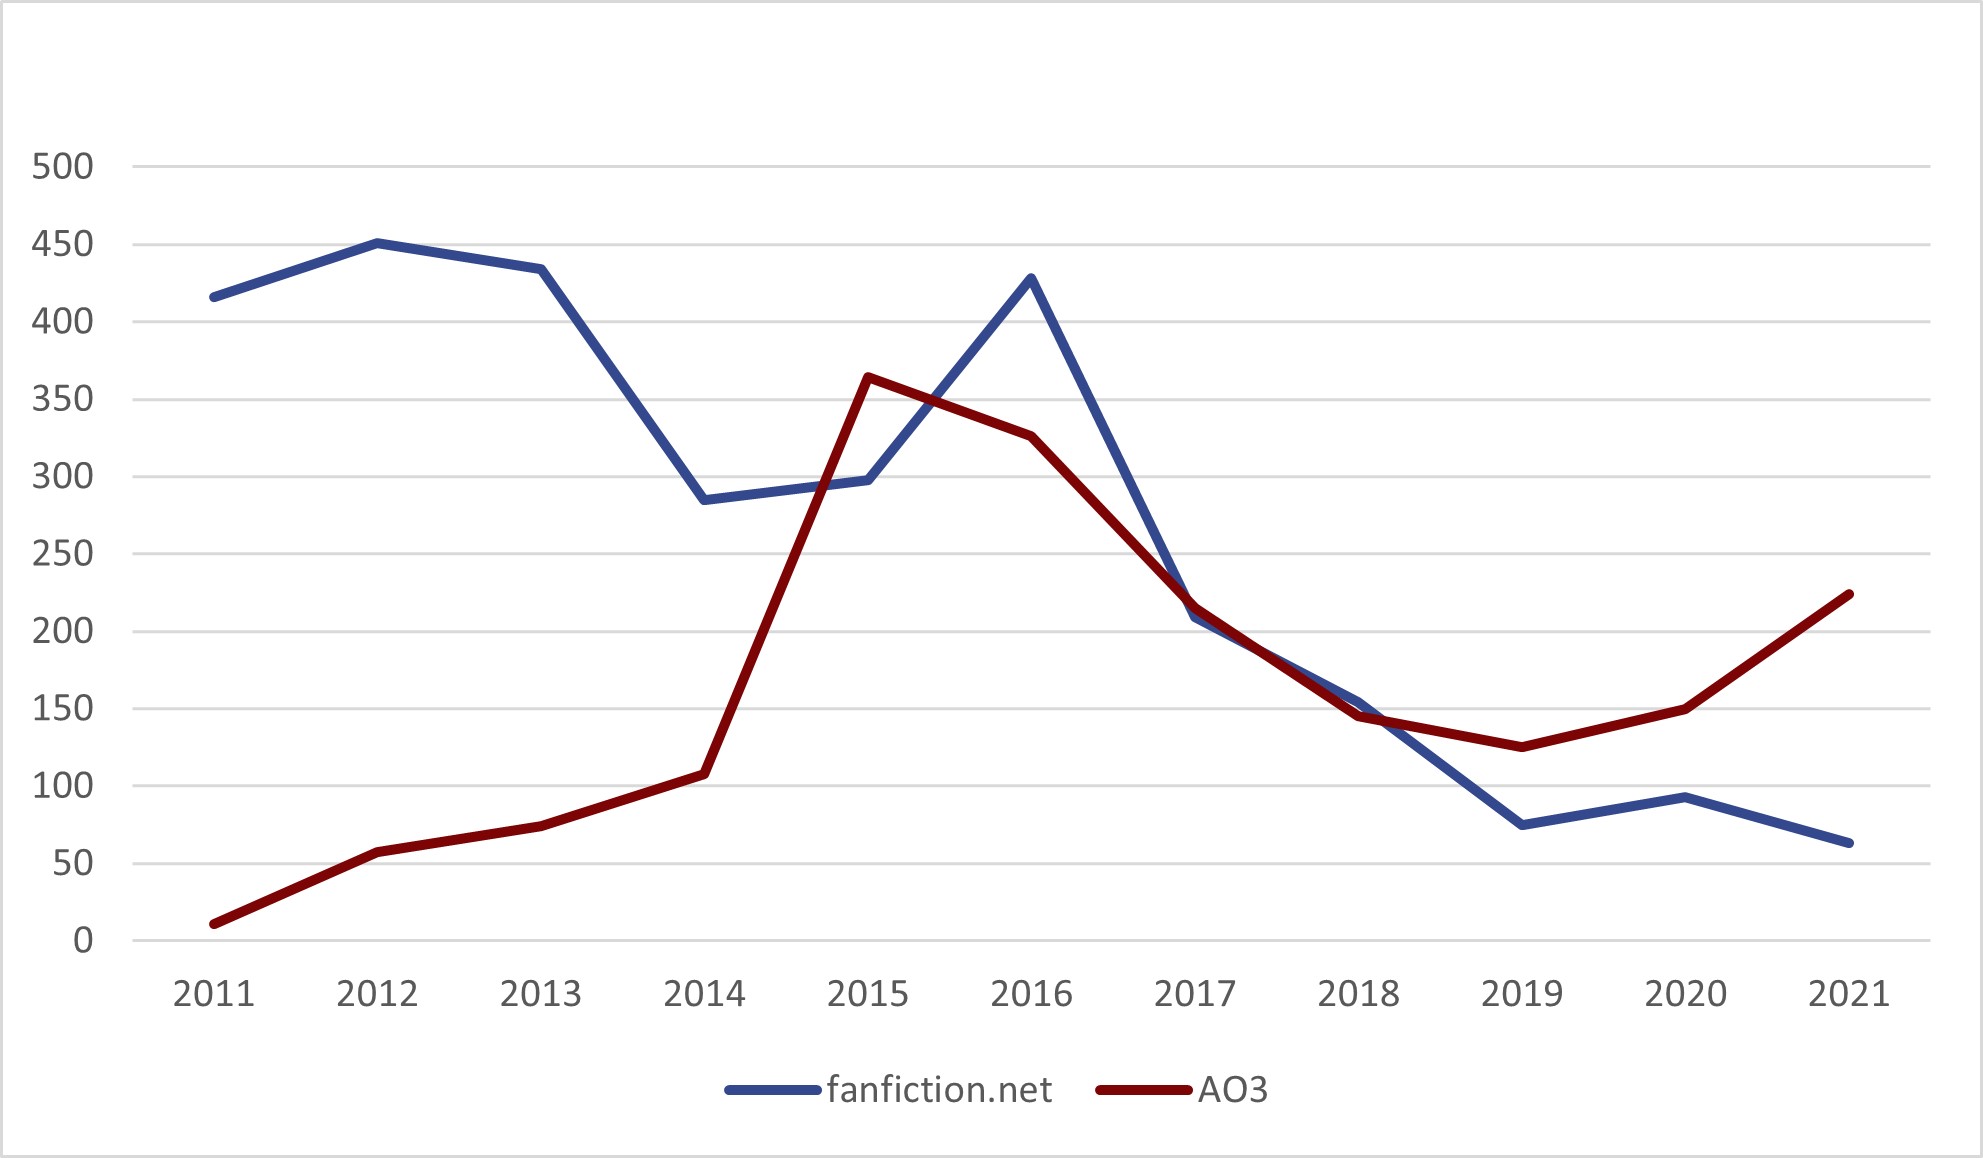 line graph comparing AO3 and FanFiction.net